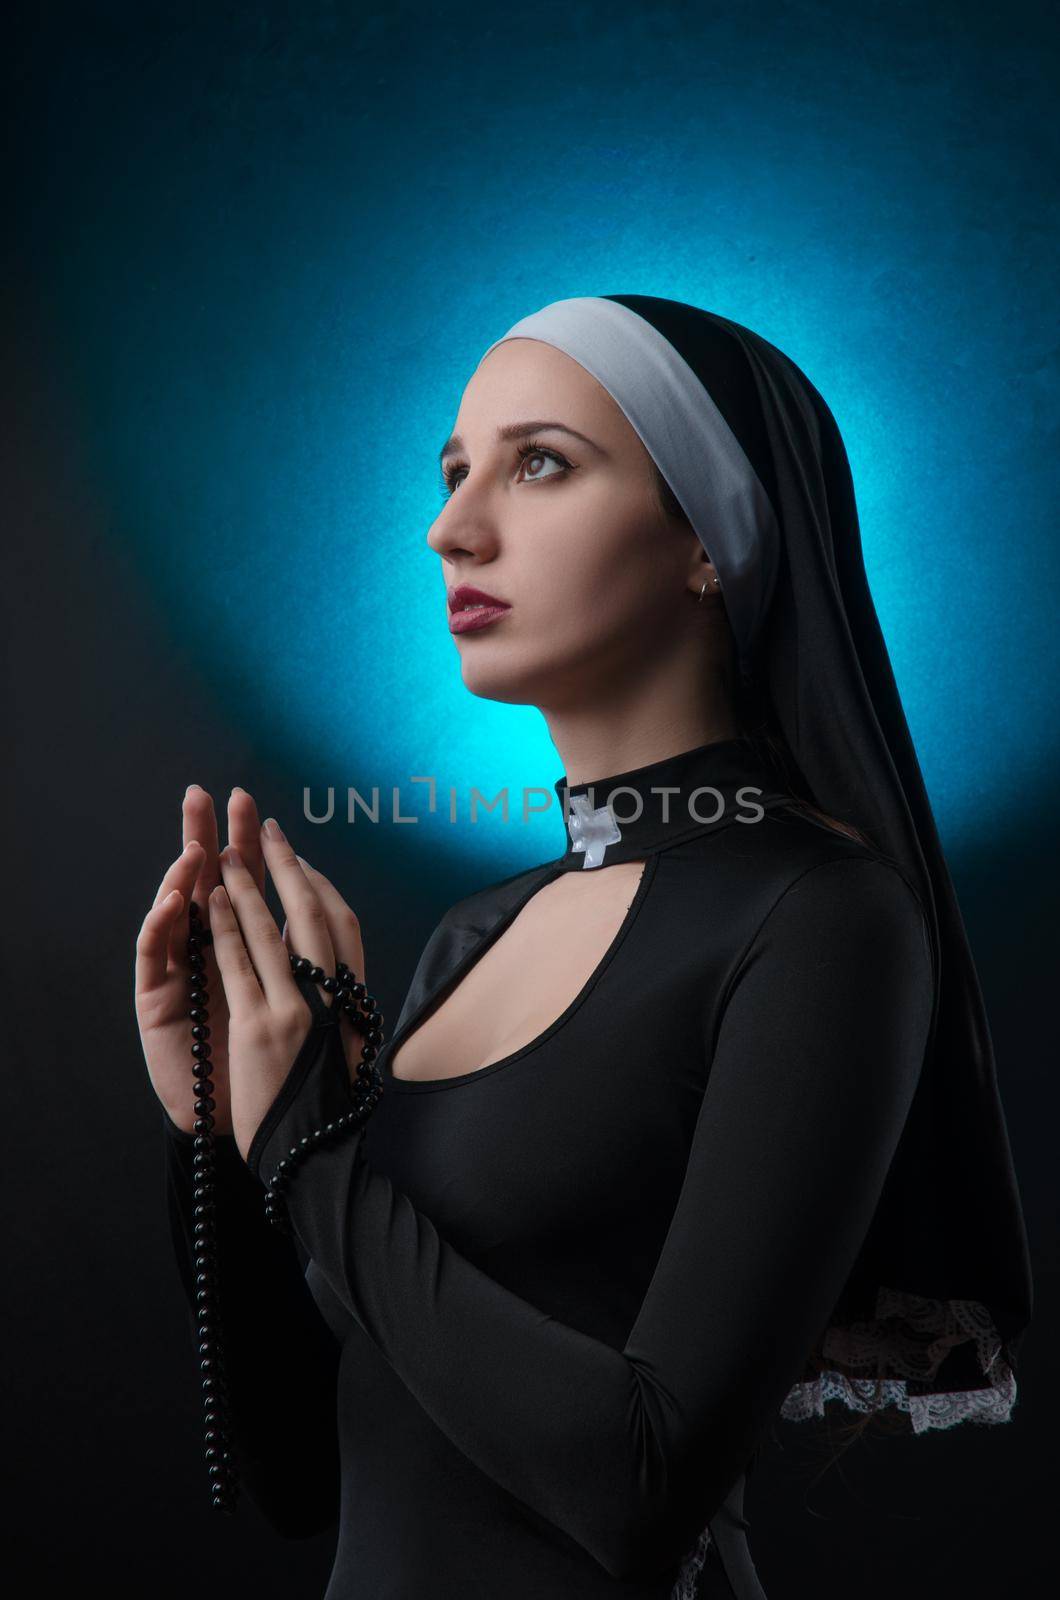 The Fine art portrait of a novice nun in deep prayer with rosary